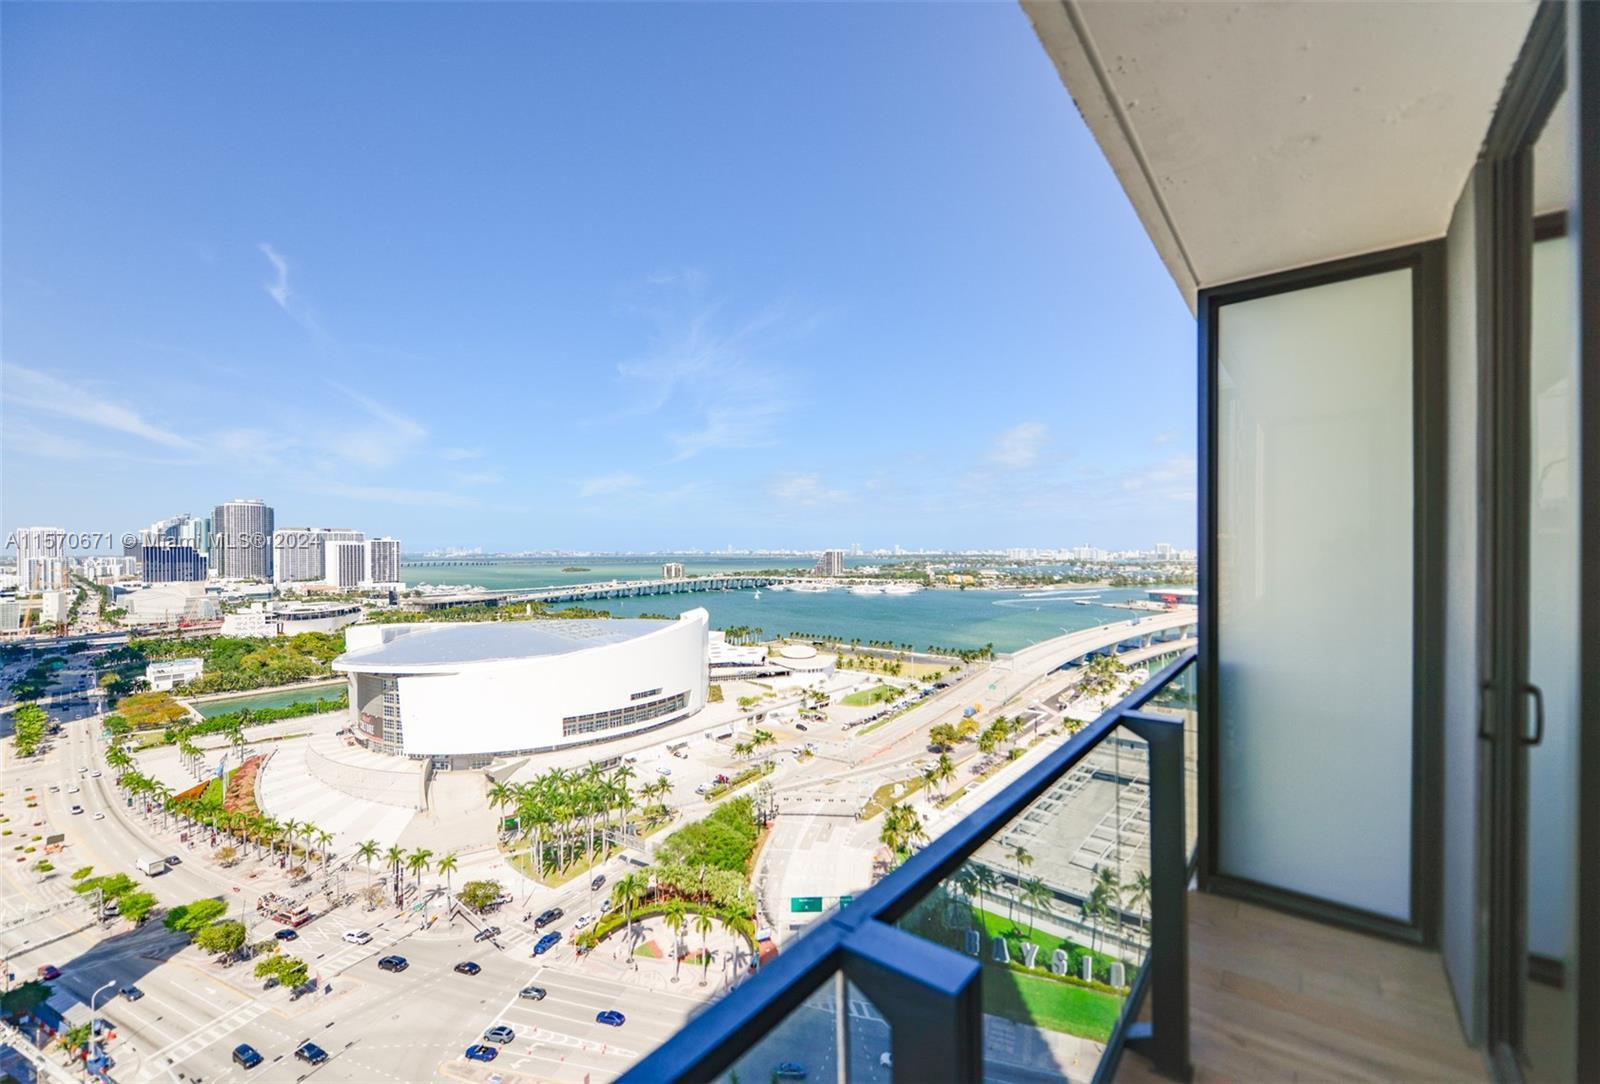 In the heart of Downtown Miami, the Elser sets a new standard for luxury living and smart investment